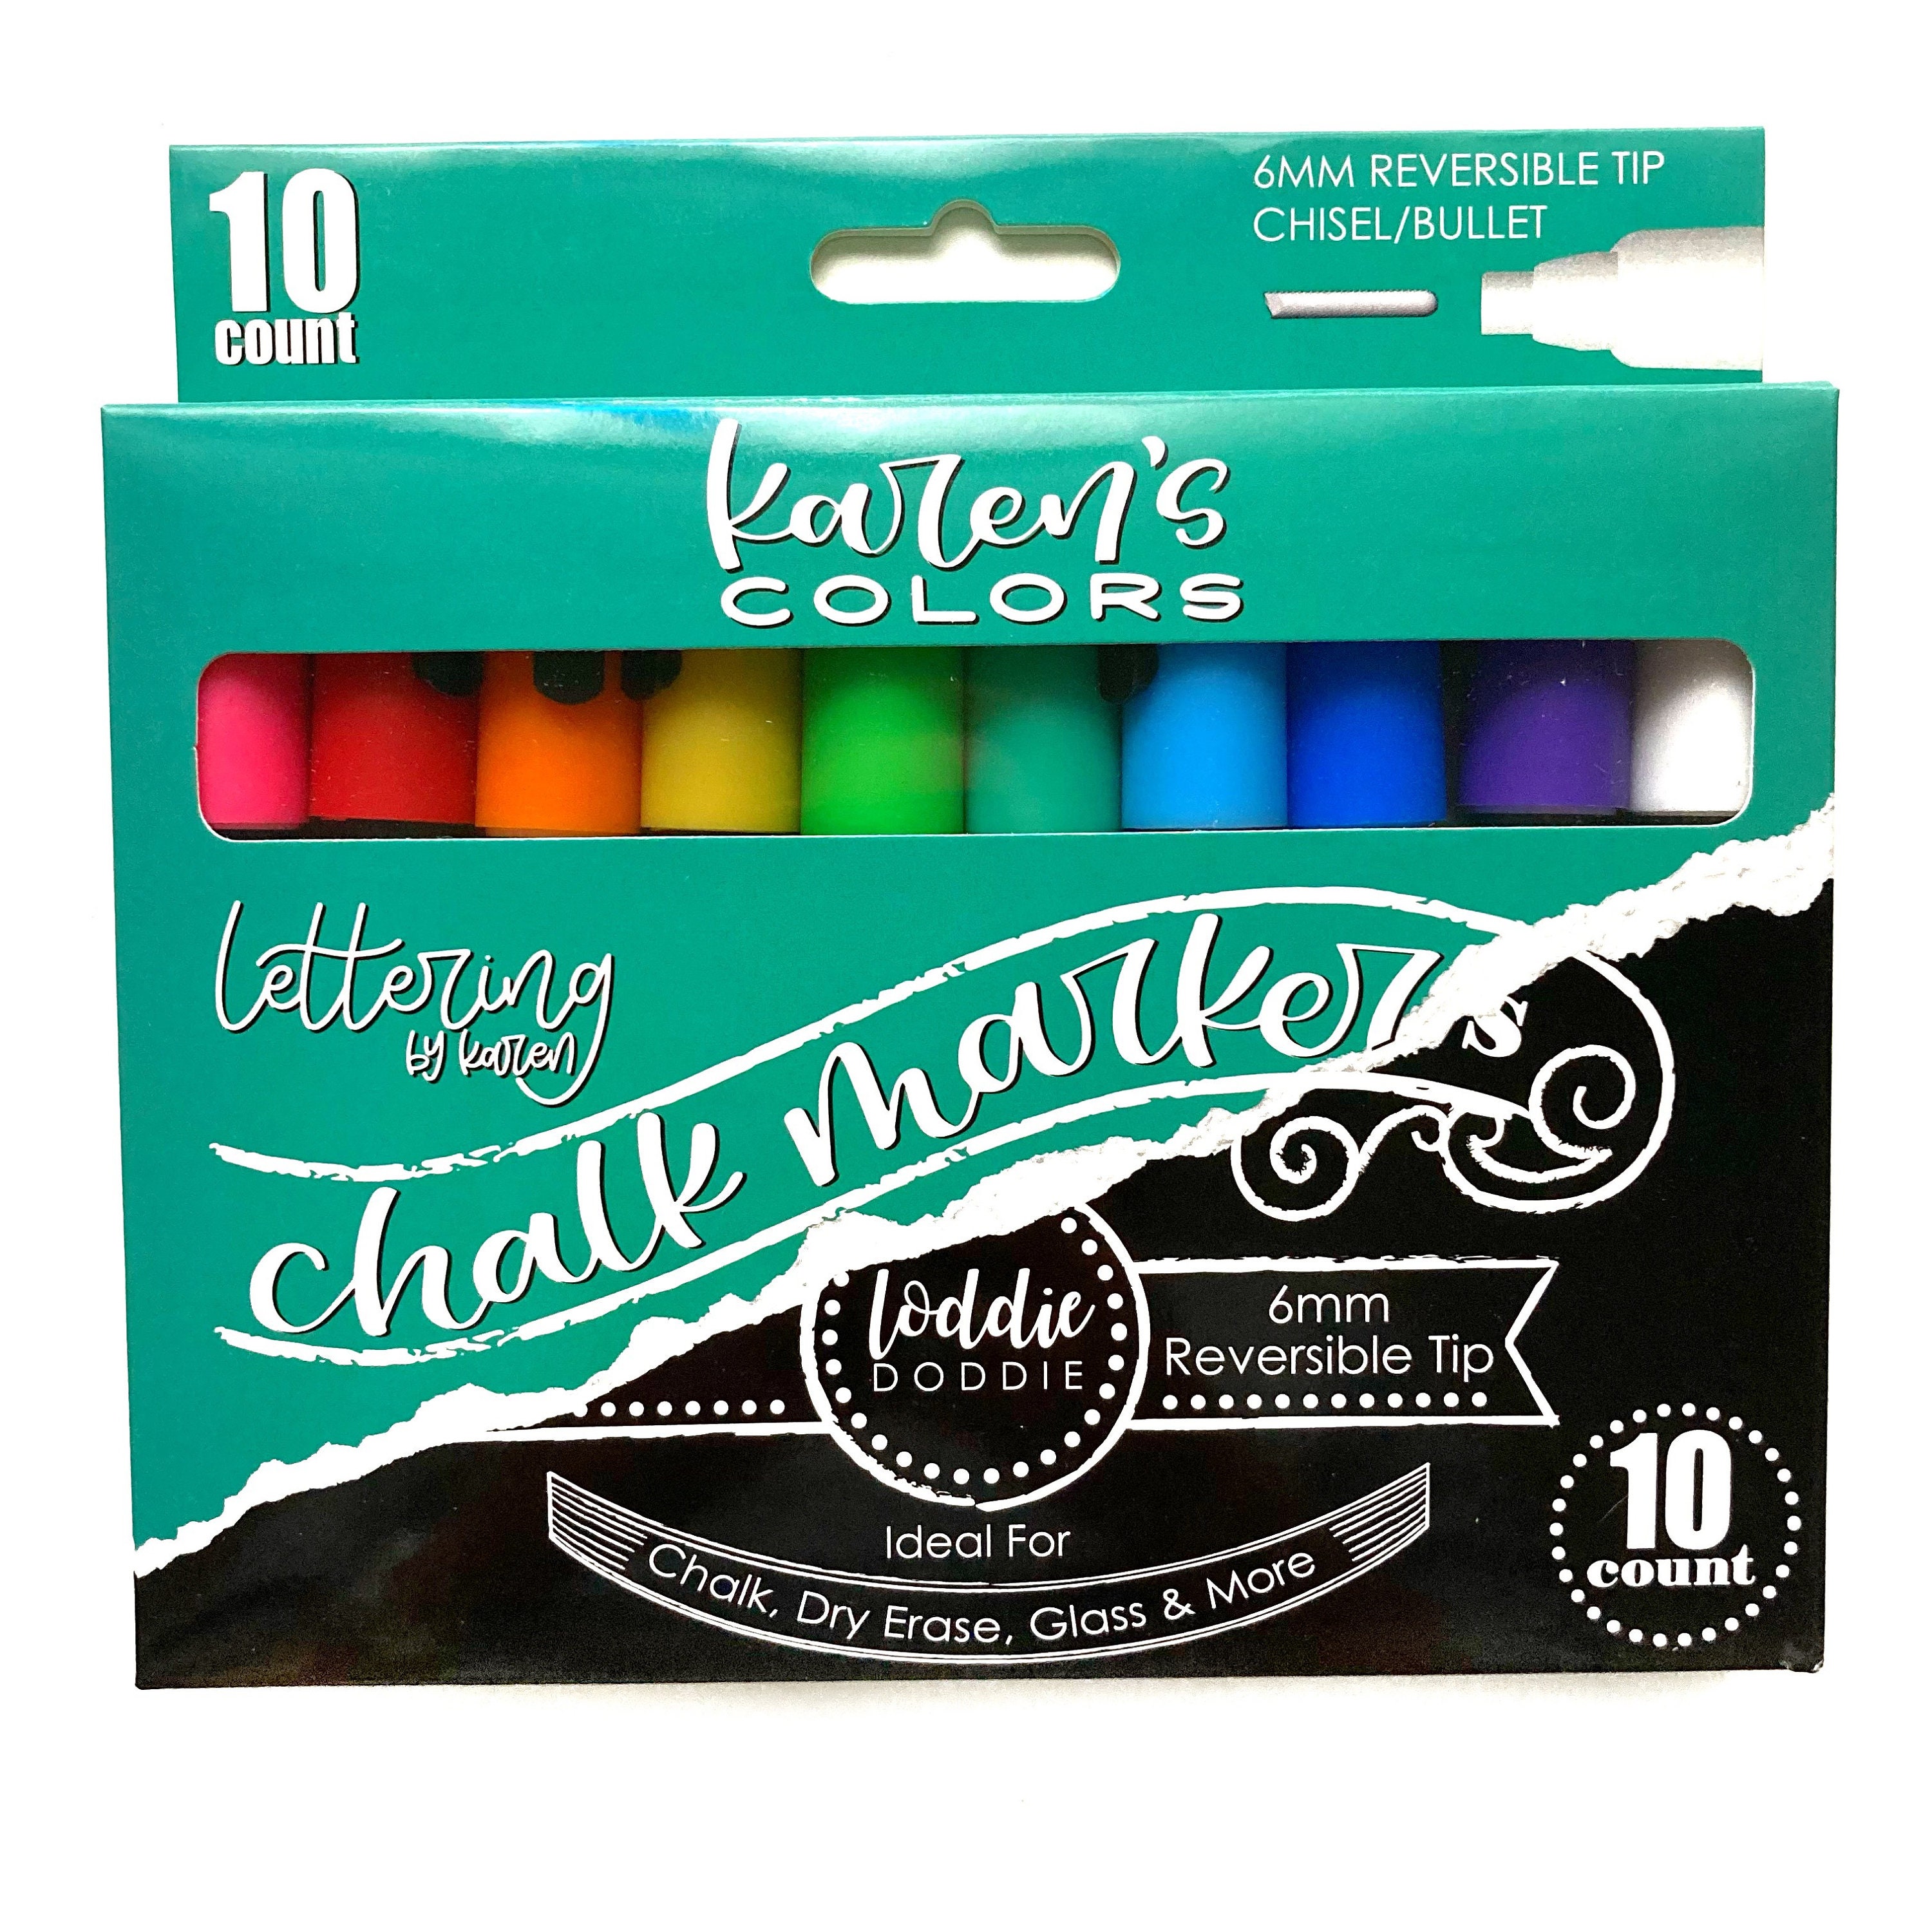 Loddie Doddie Liquid Chalk Markers for Chalkboard - 6mm Reversible Chisel  and Bullet Tips, Chalkboard Markers Erasable, Metallic Chalk Pens 8 Count